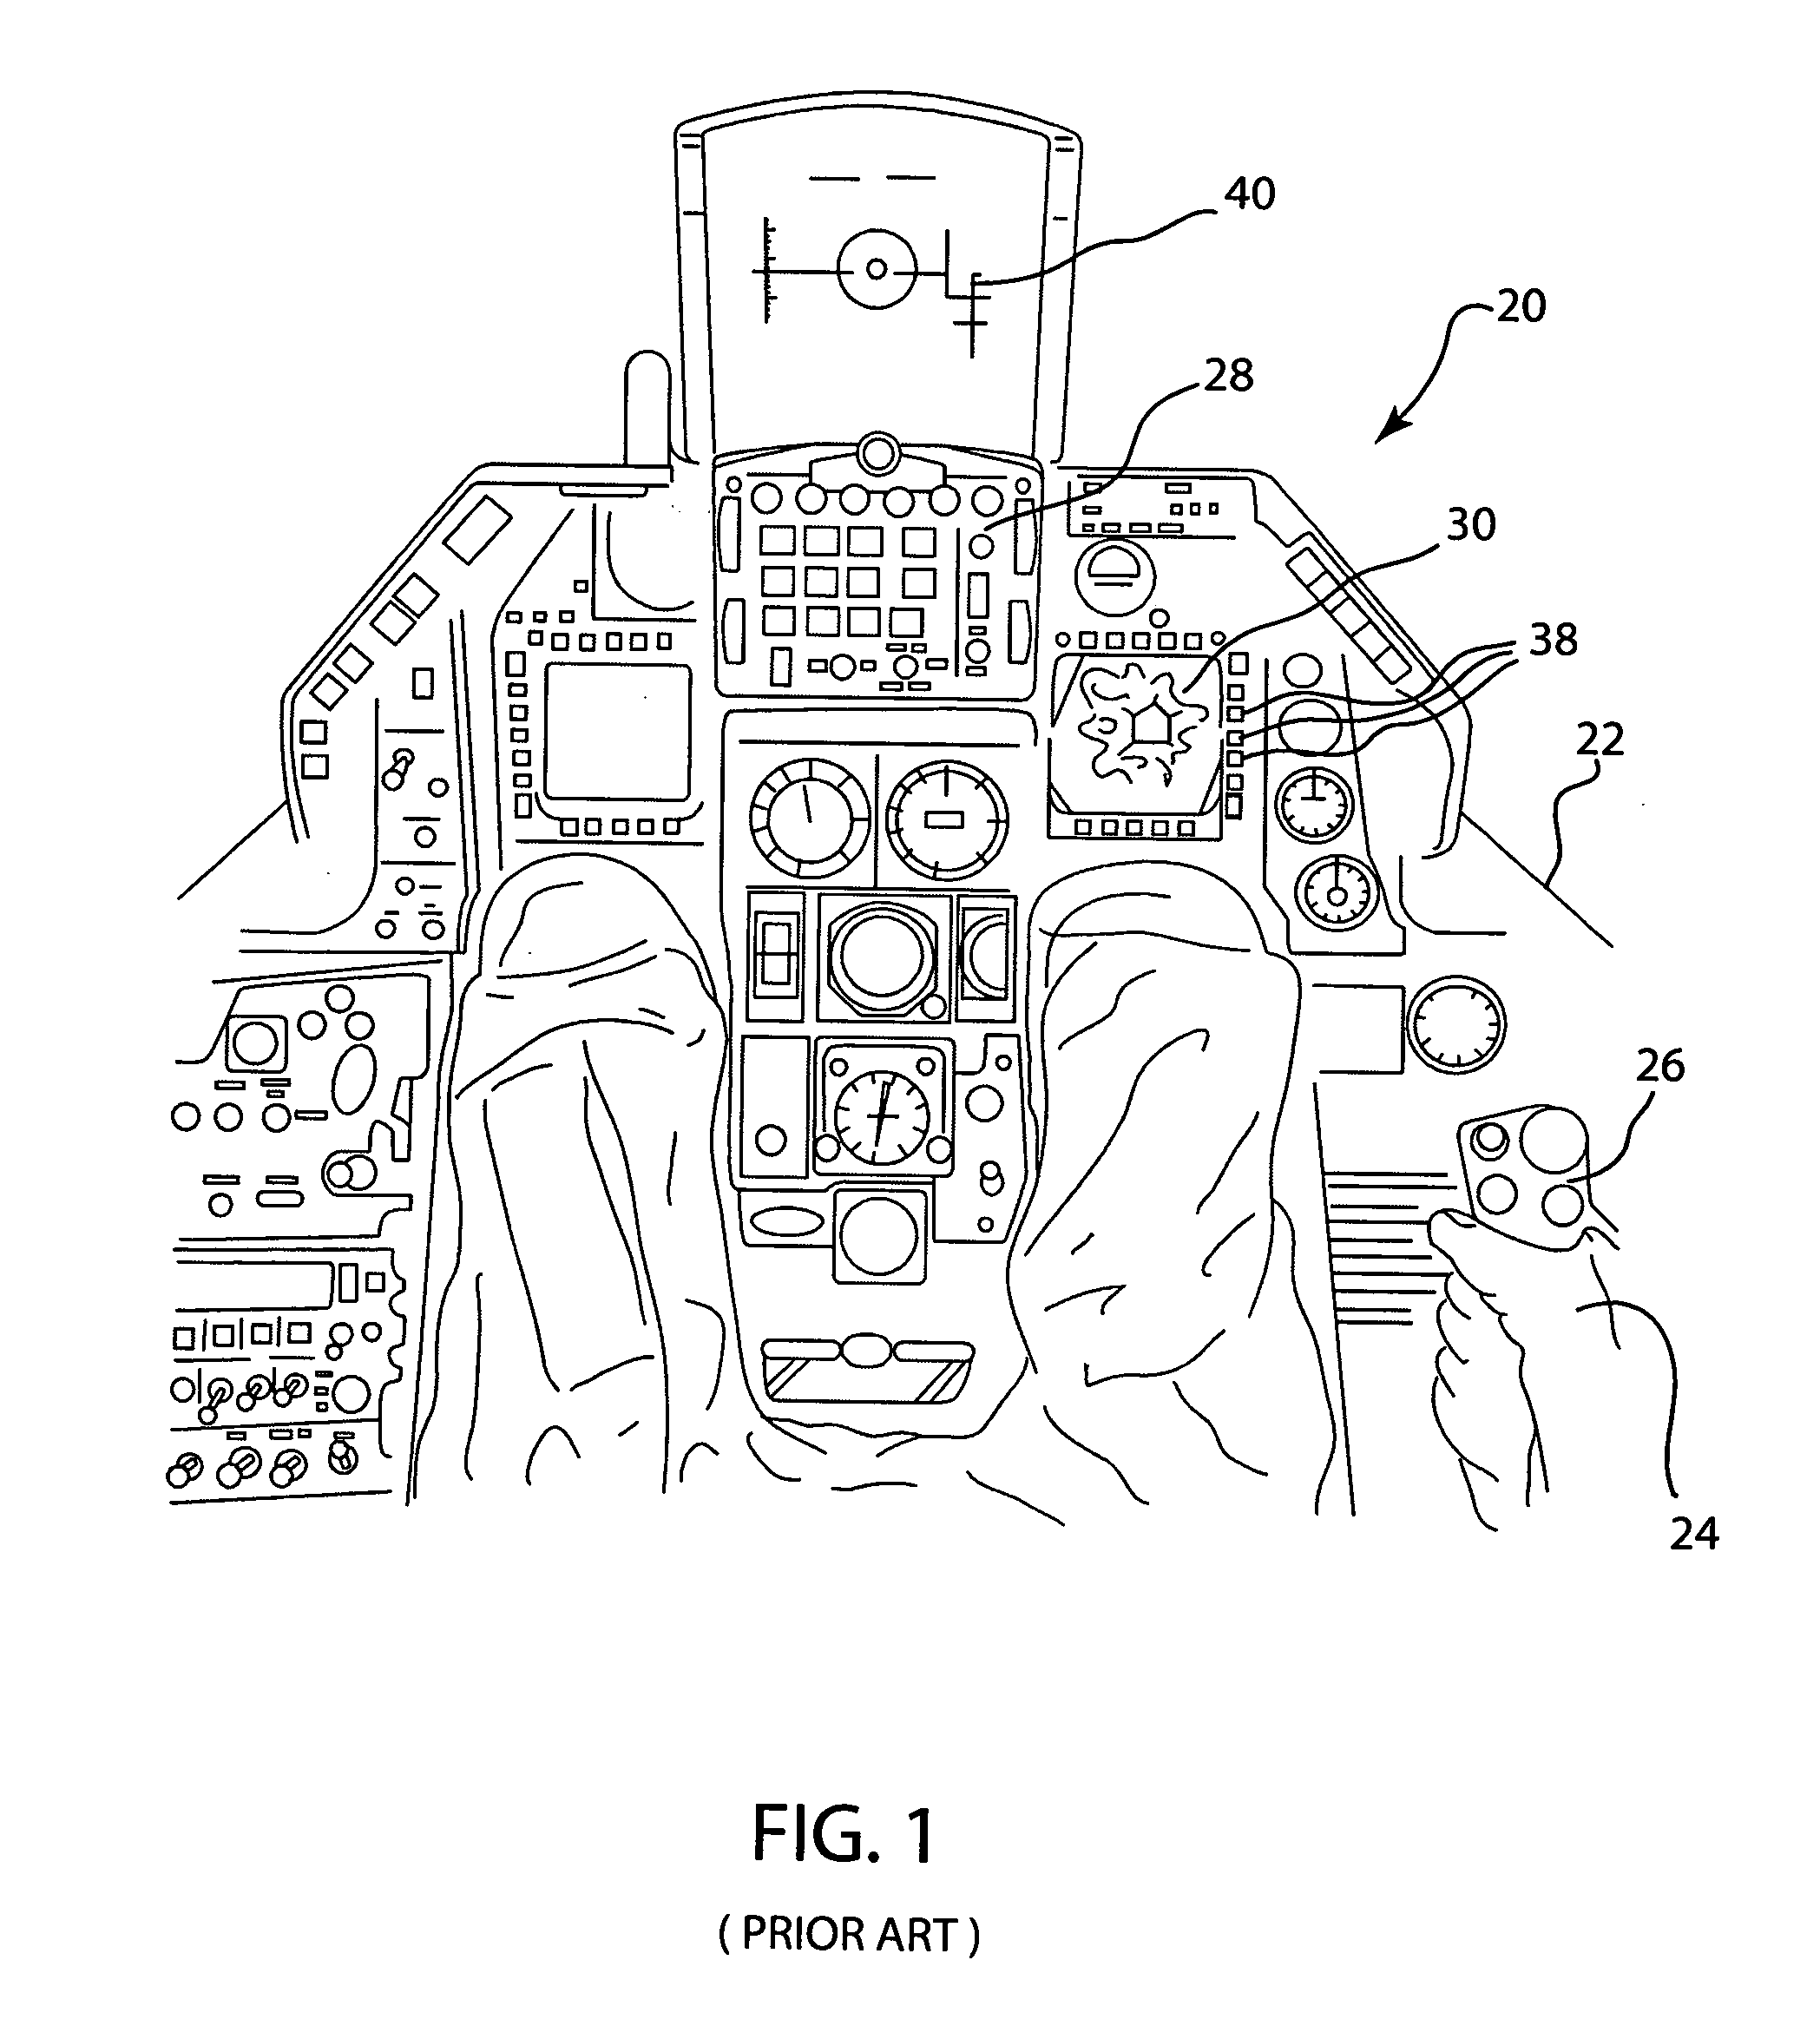 Method for reconditioning or processing a FCR APG-68 tactical radar unit